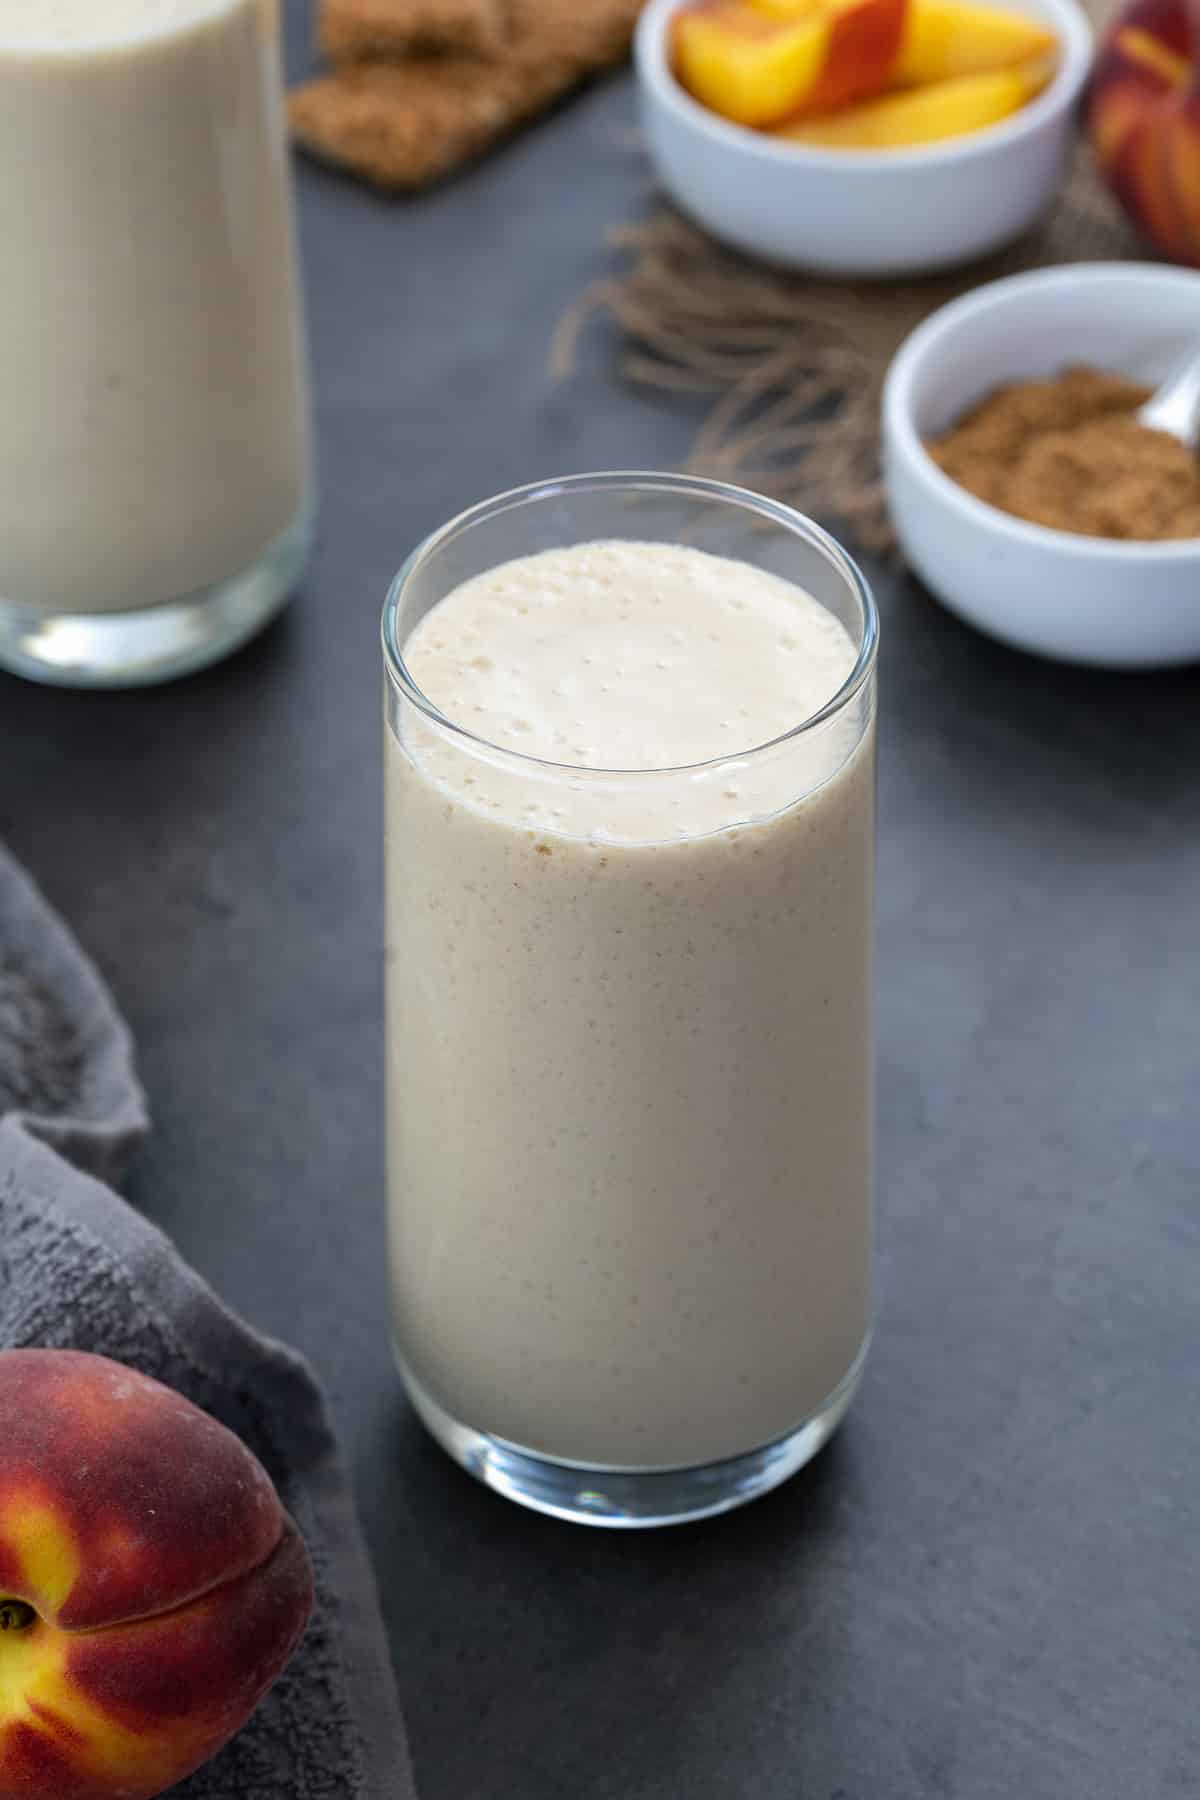 Peach smoothie in a glass with whole and cut peach with sugar around.